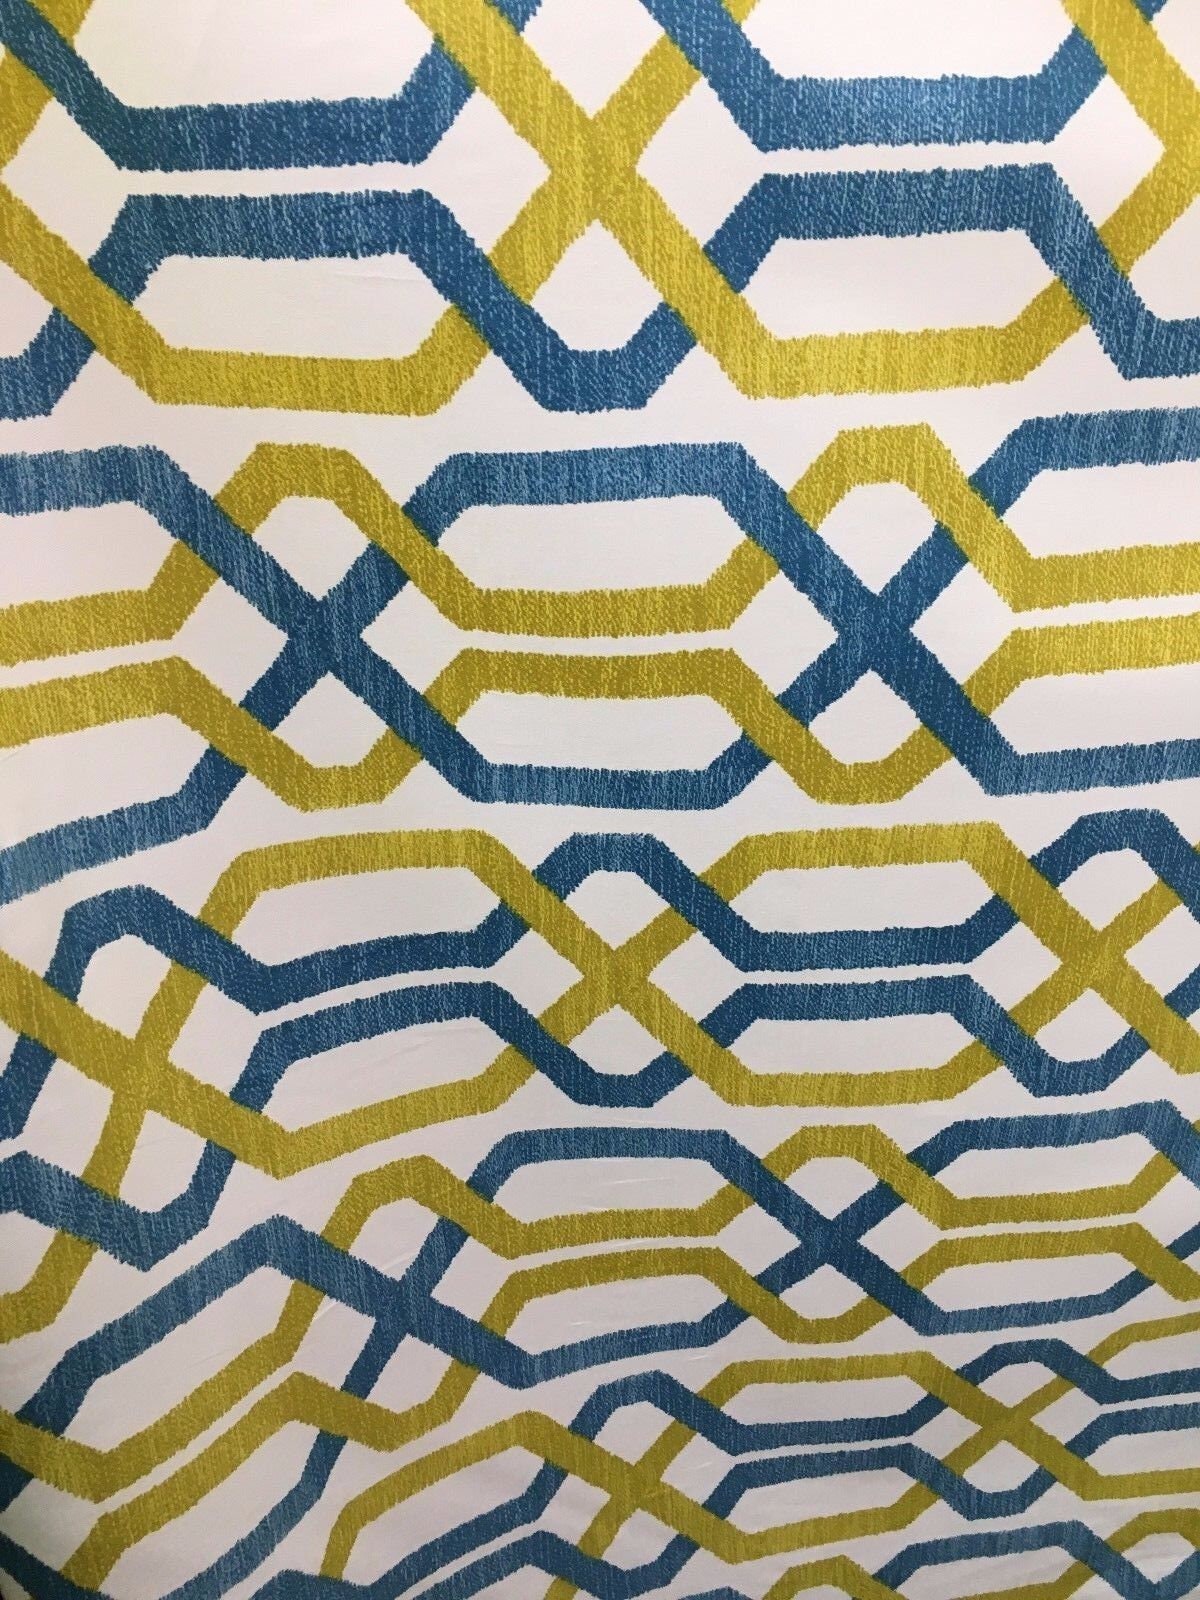 P KAUFMANN Yellow Teal Designer 100% Cotton Fabric (54 in.) Sold By The Yard